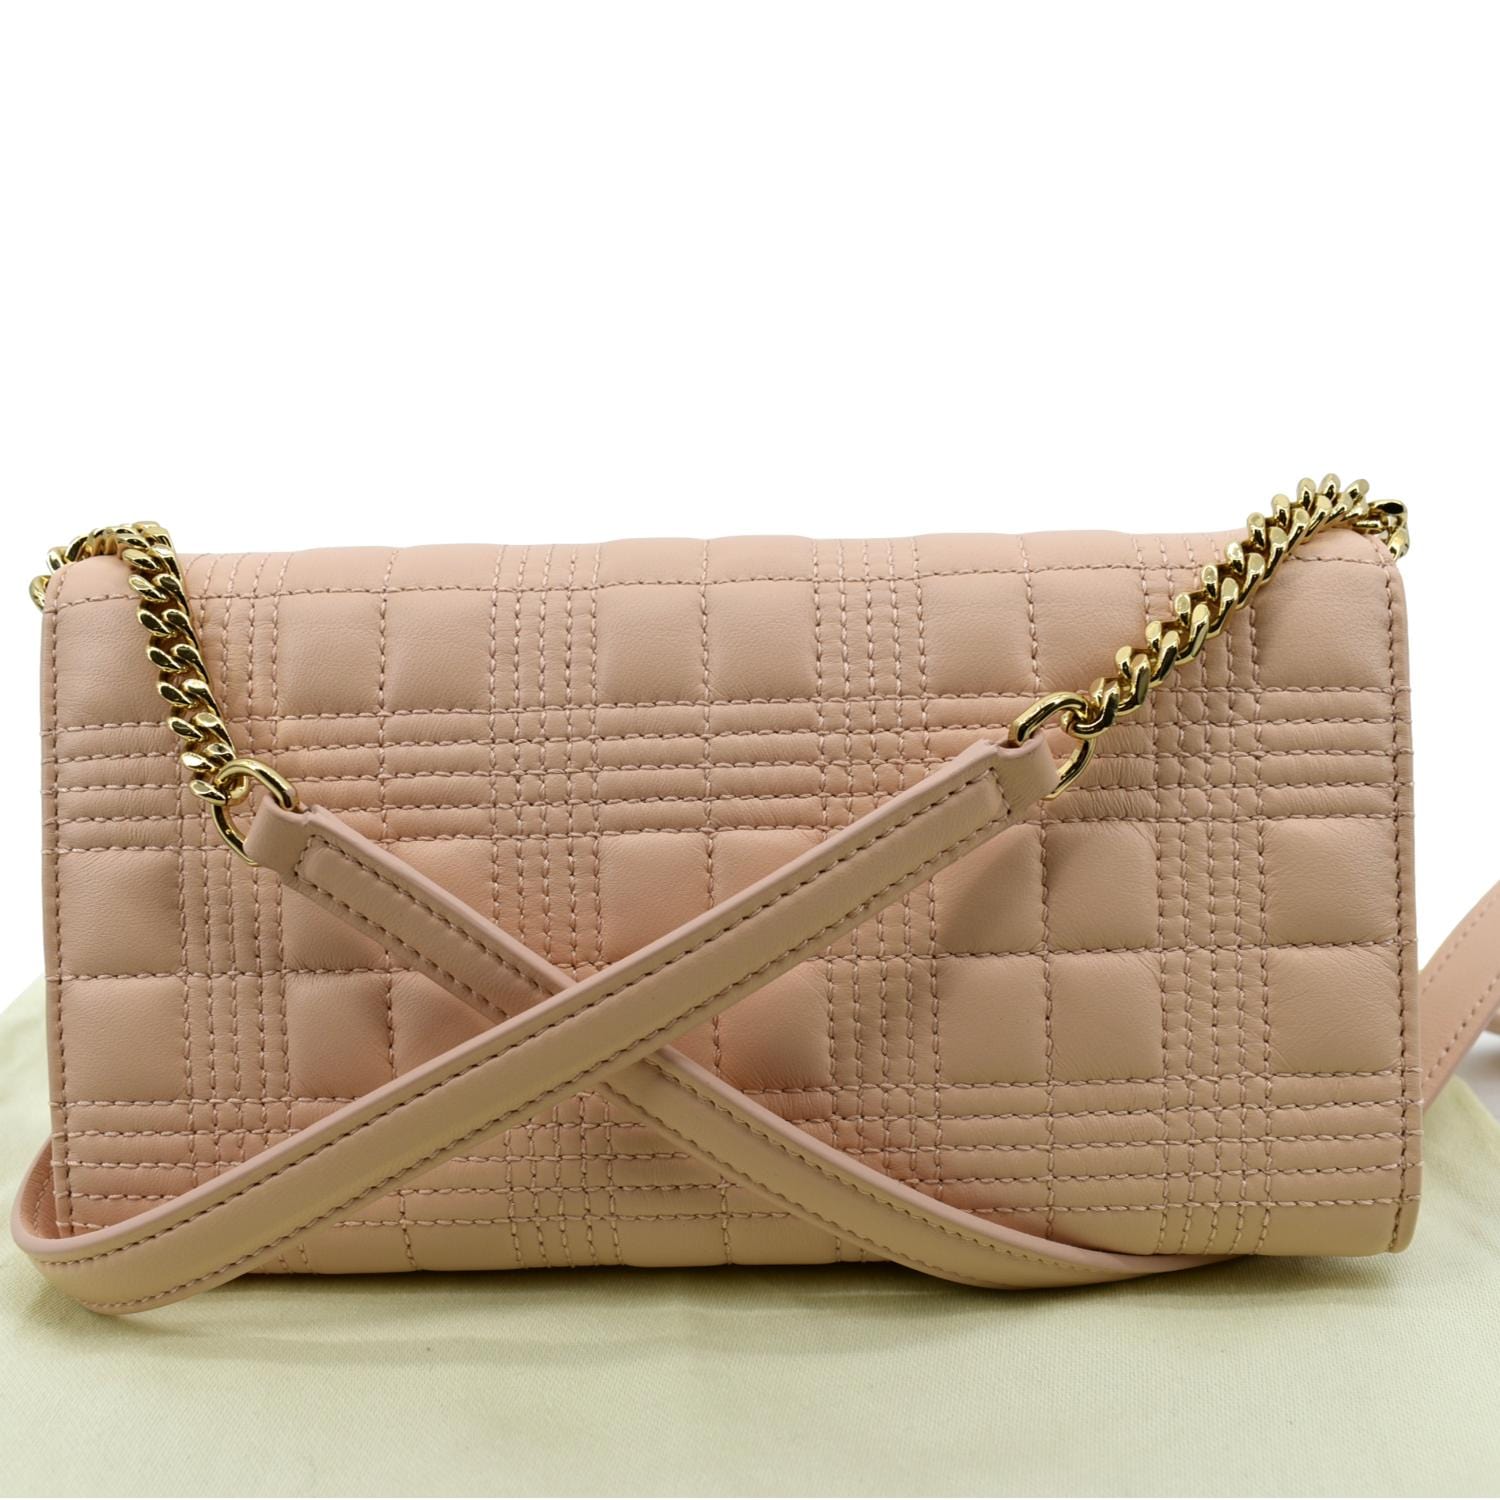 Burberry Outlet: Lola bag in quilted leather - Beige